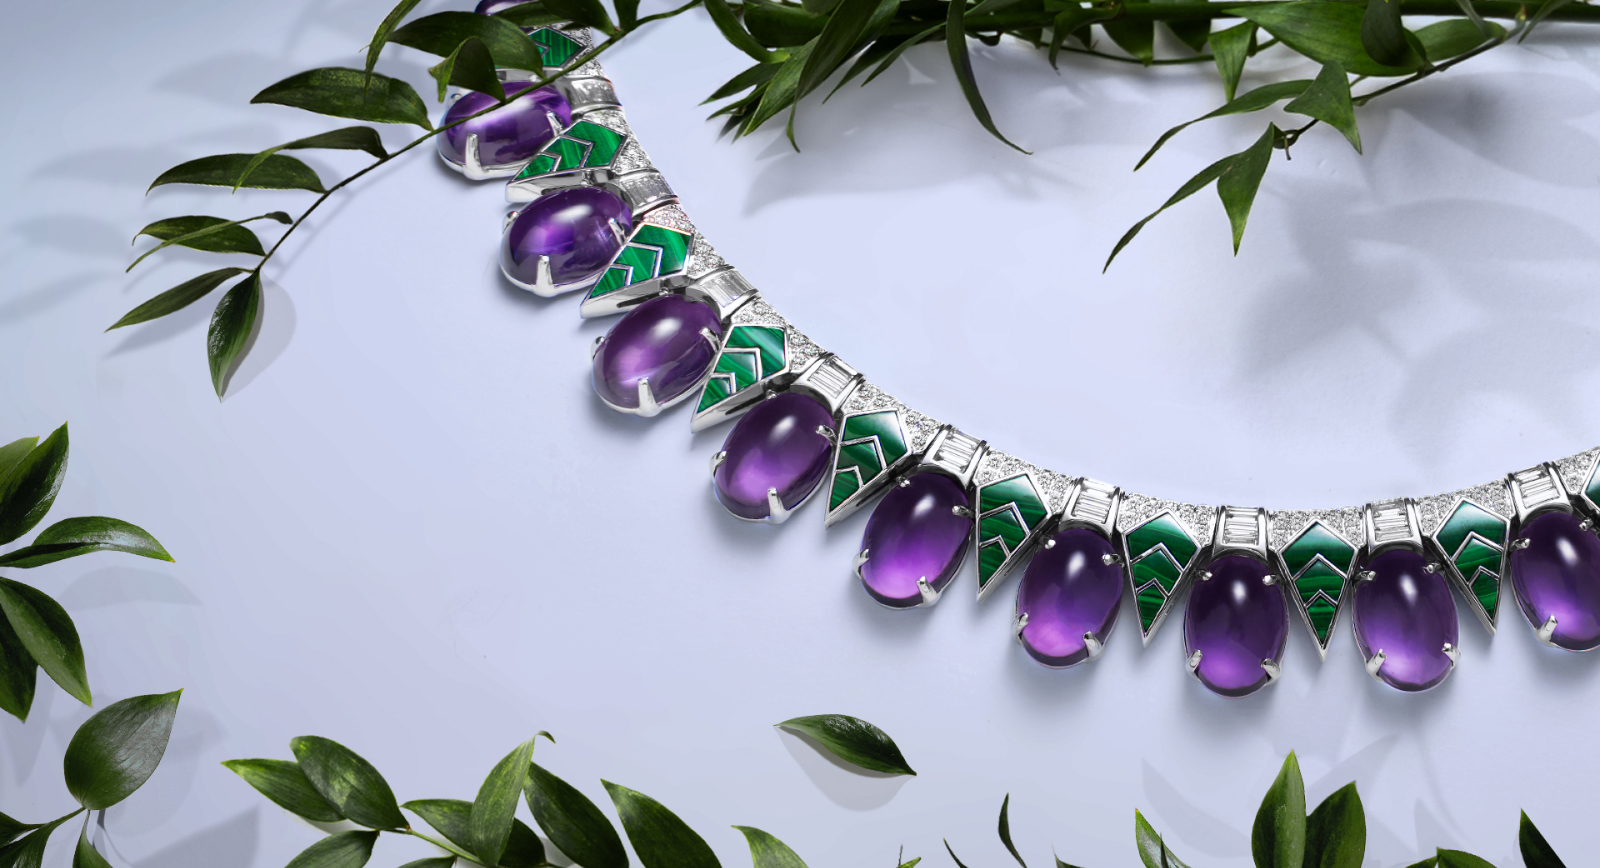 Al Zain Leena necklace with 101.53 carats of amethyst, 19.60 carats of malachite and 8.41 carats of diamonds from the Jena High Jewellery collection